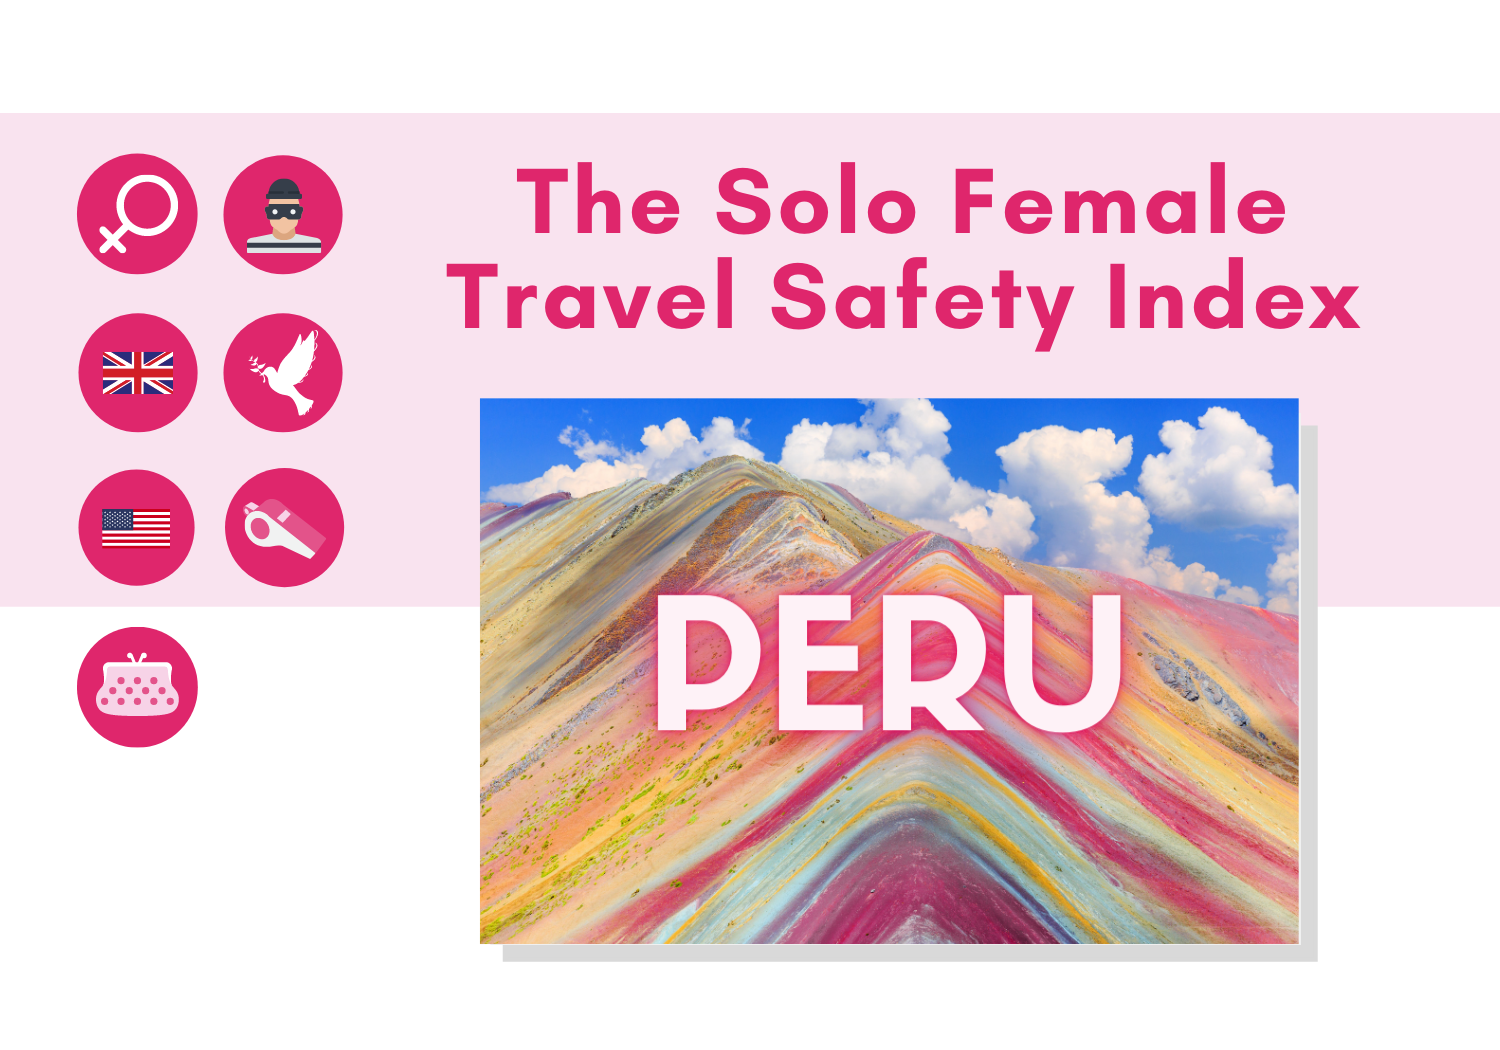 Solo female travel safety in Peru